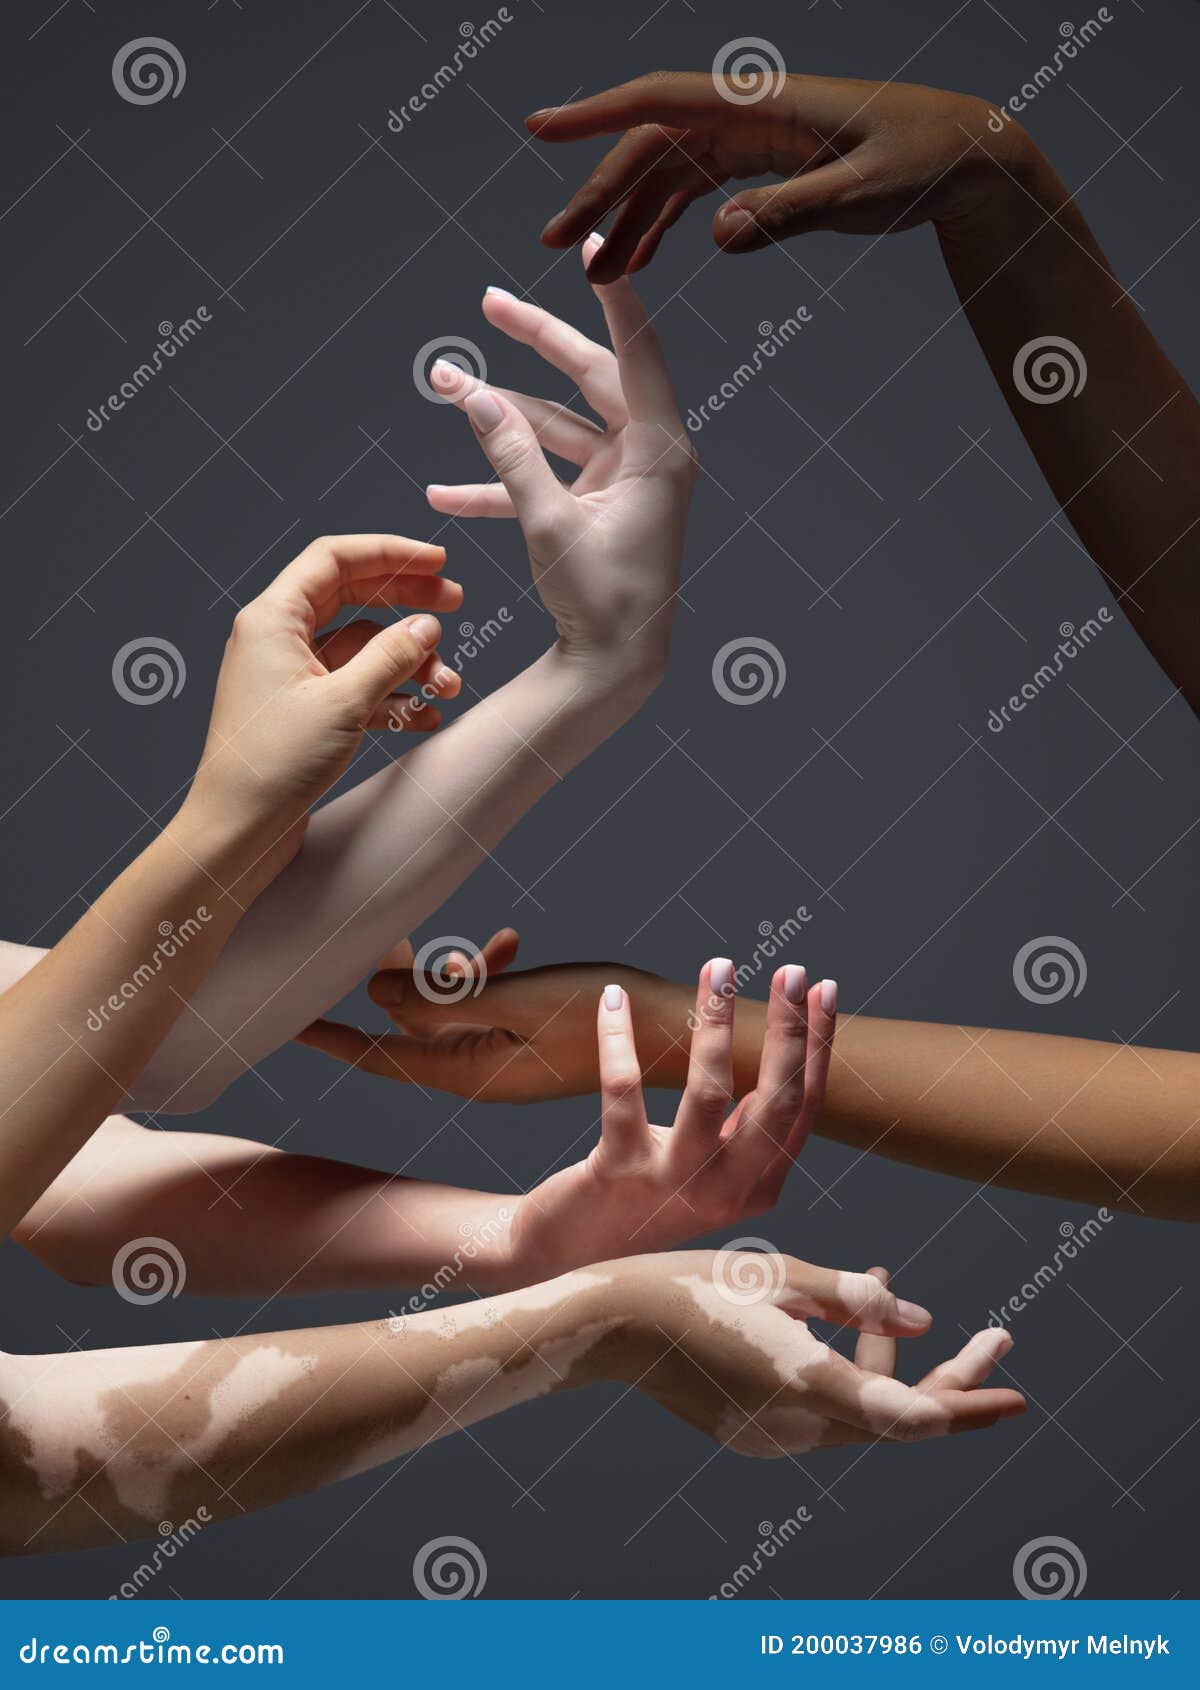 Hands of Different People in Touch Isolated on Grey Studio Background ...